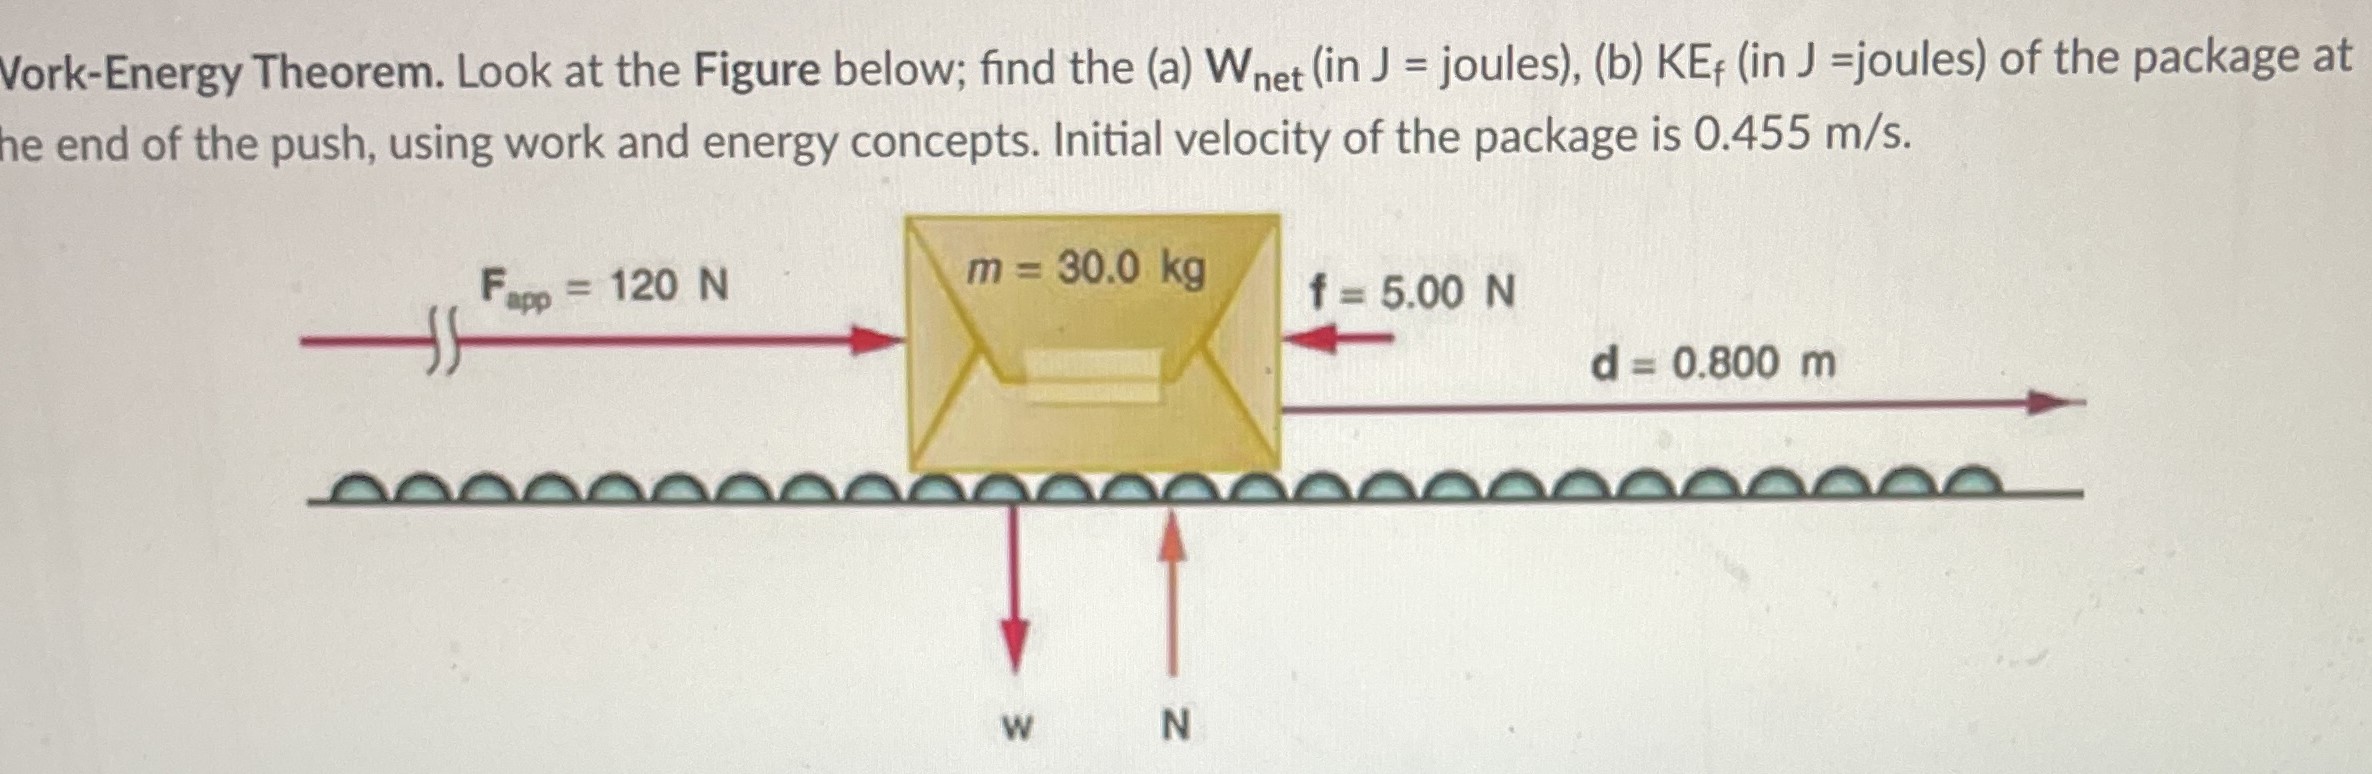 Work-Energy Theorem. Look at the Figure below; find the (a) Wnet (in J = joules), (b) KEf (in J = joules) of the package at he end of the push, using work and energy concepts. Initial velocity of the package is 0.455 m/s.